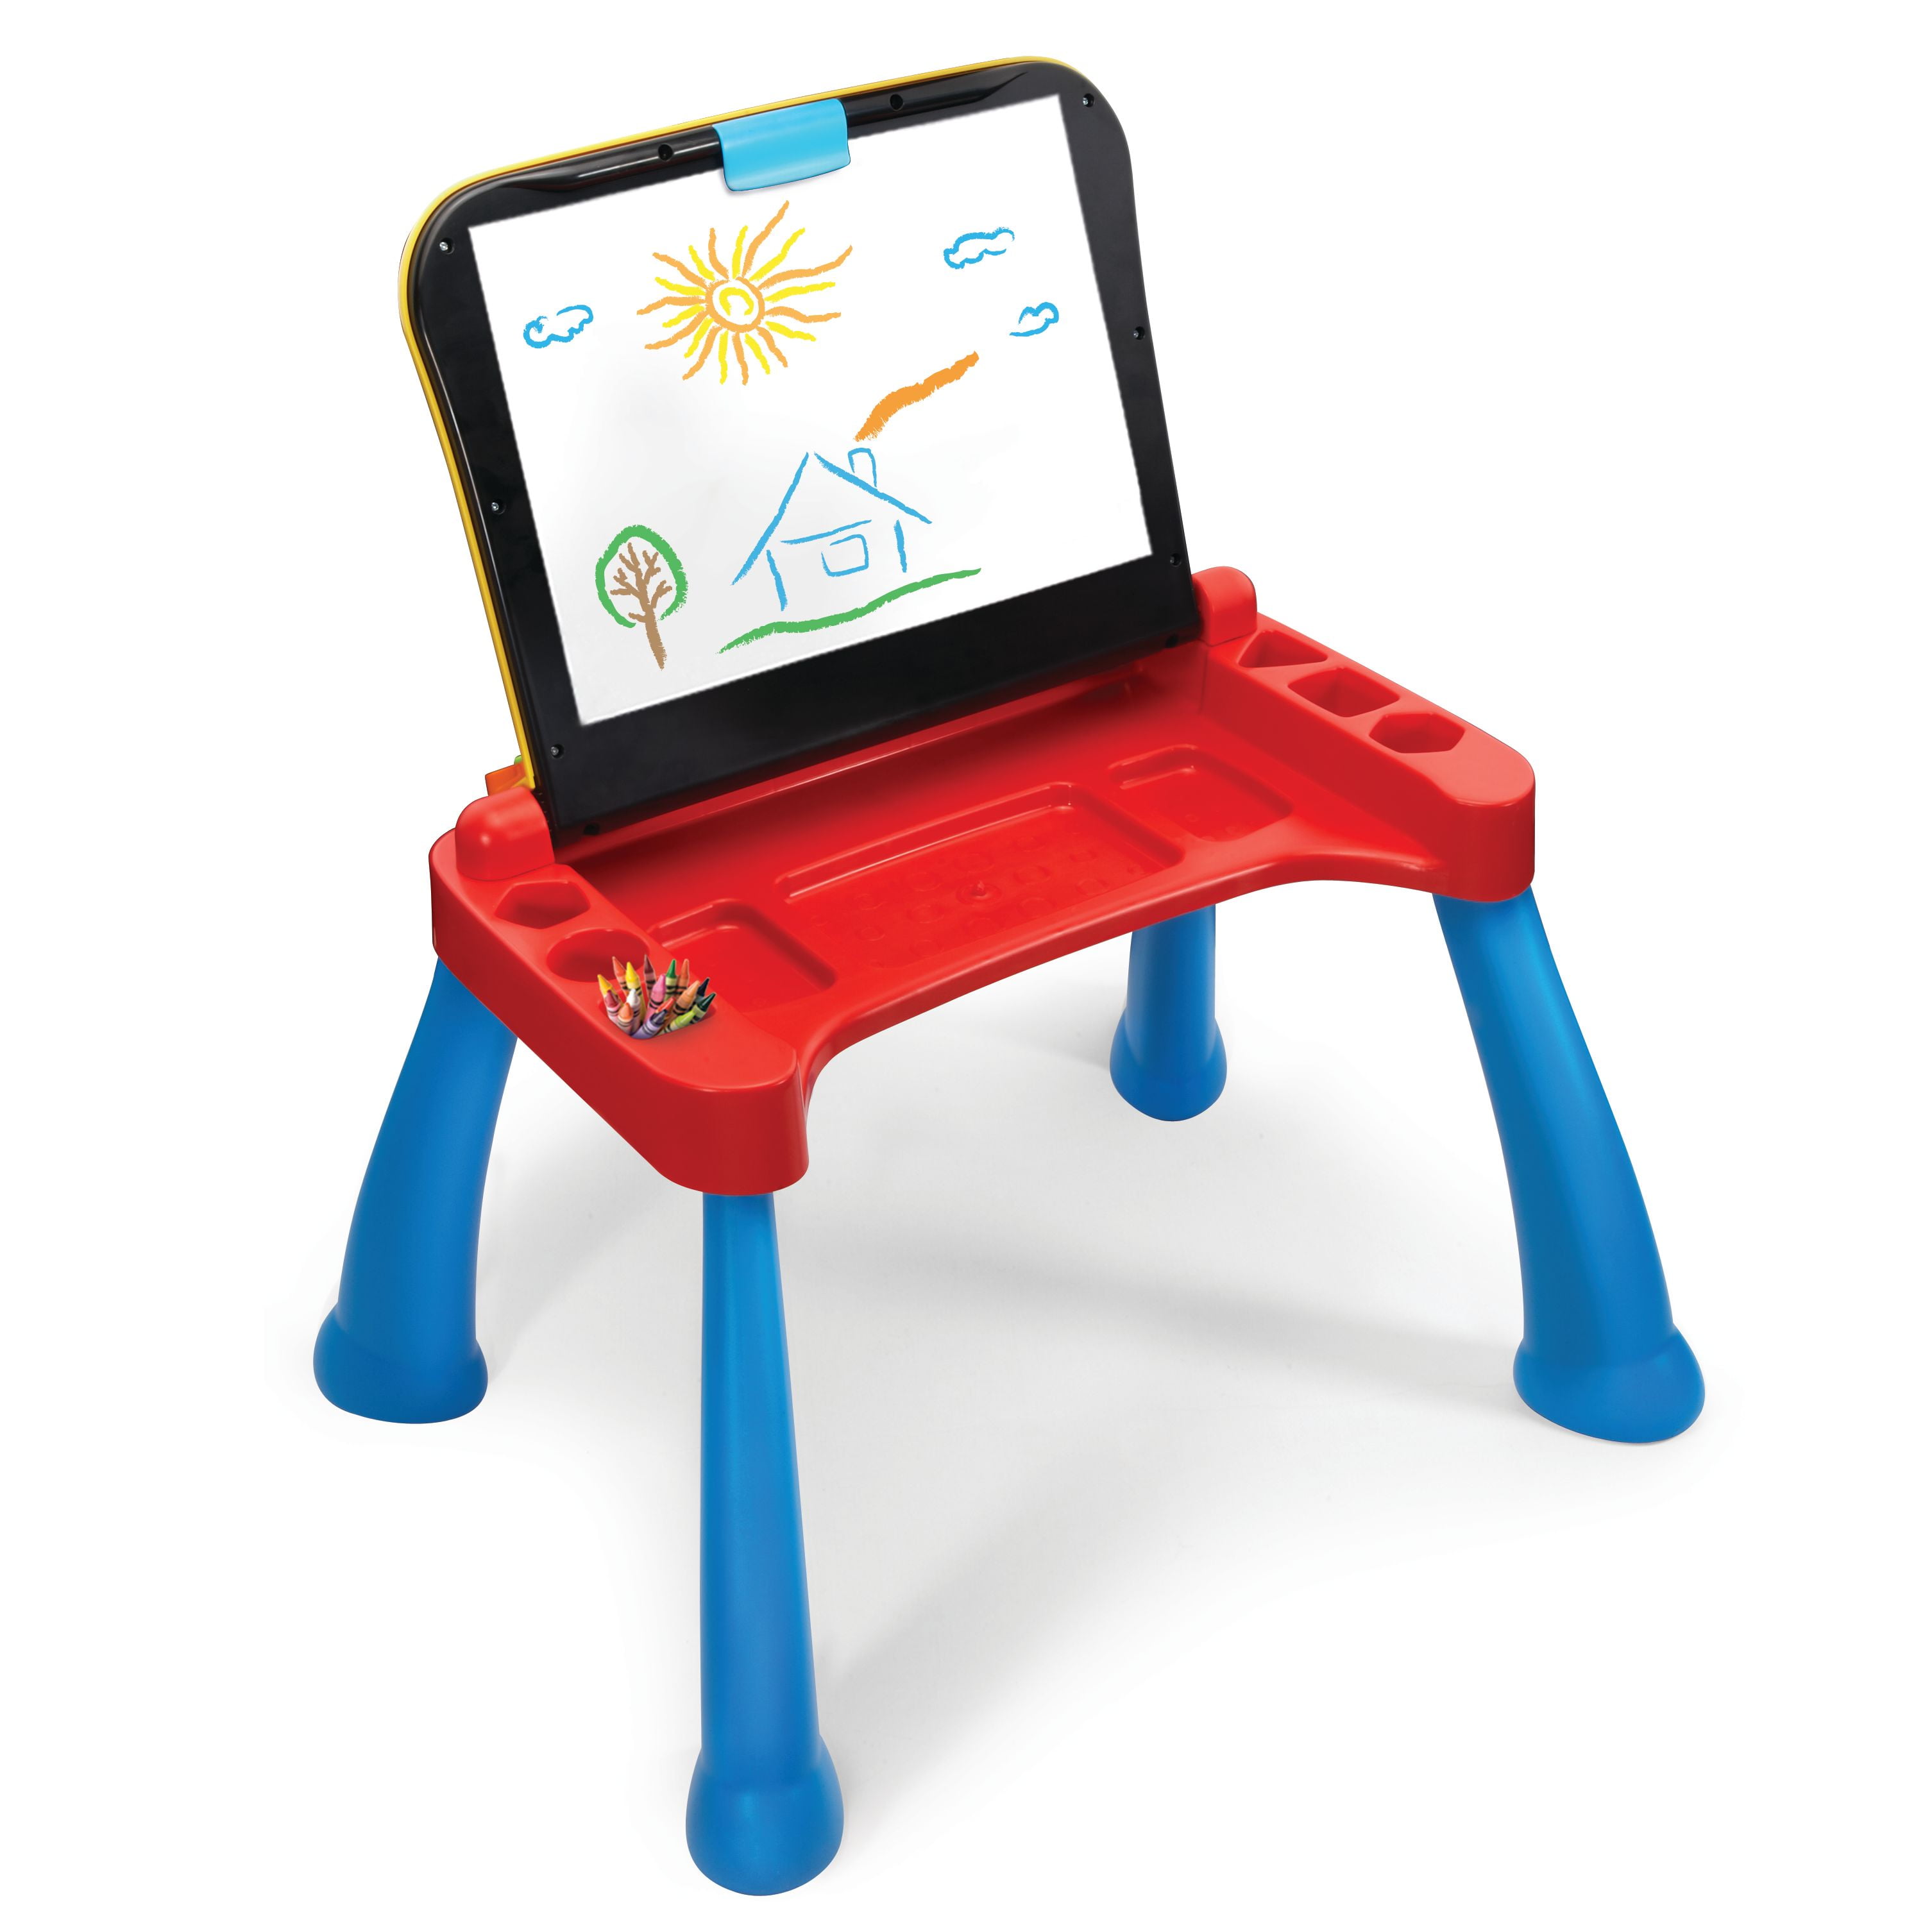 80-194800 Vtech Touch & Learn Activity Desk for sale online 